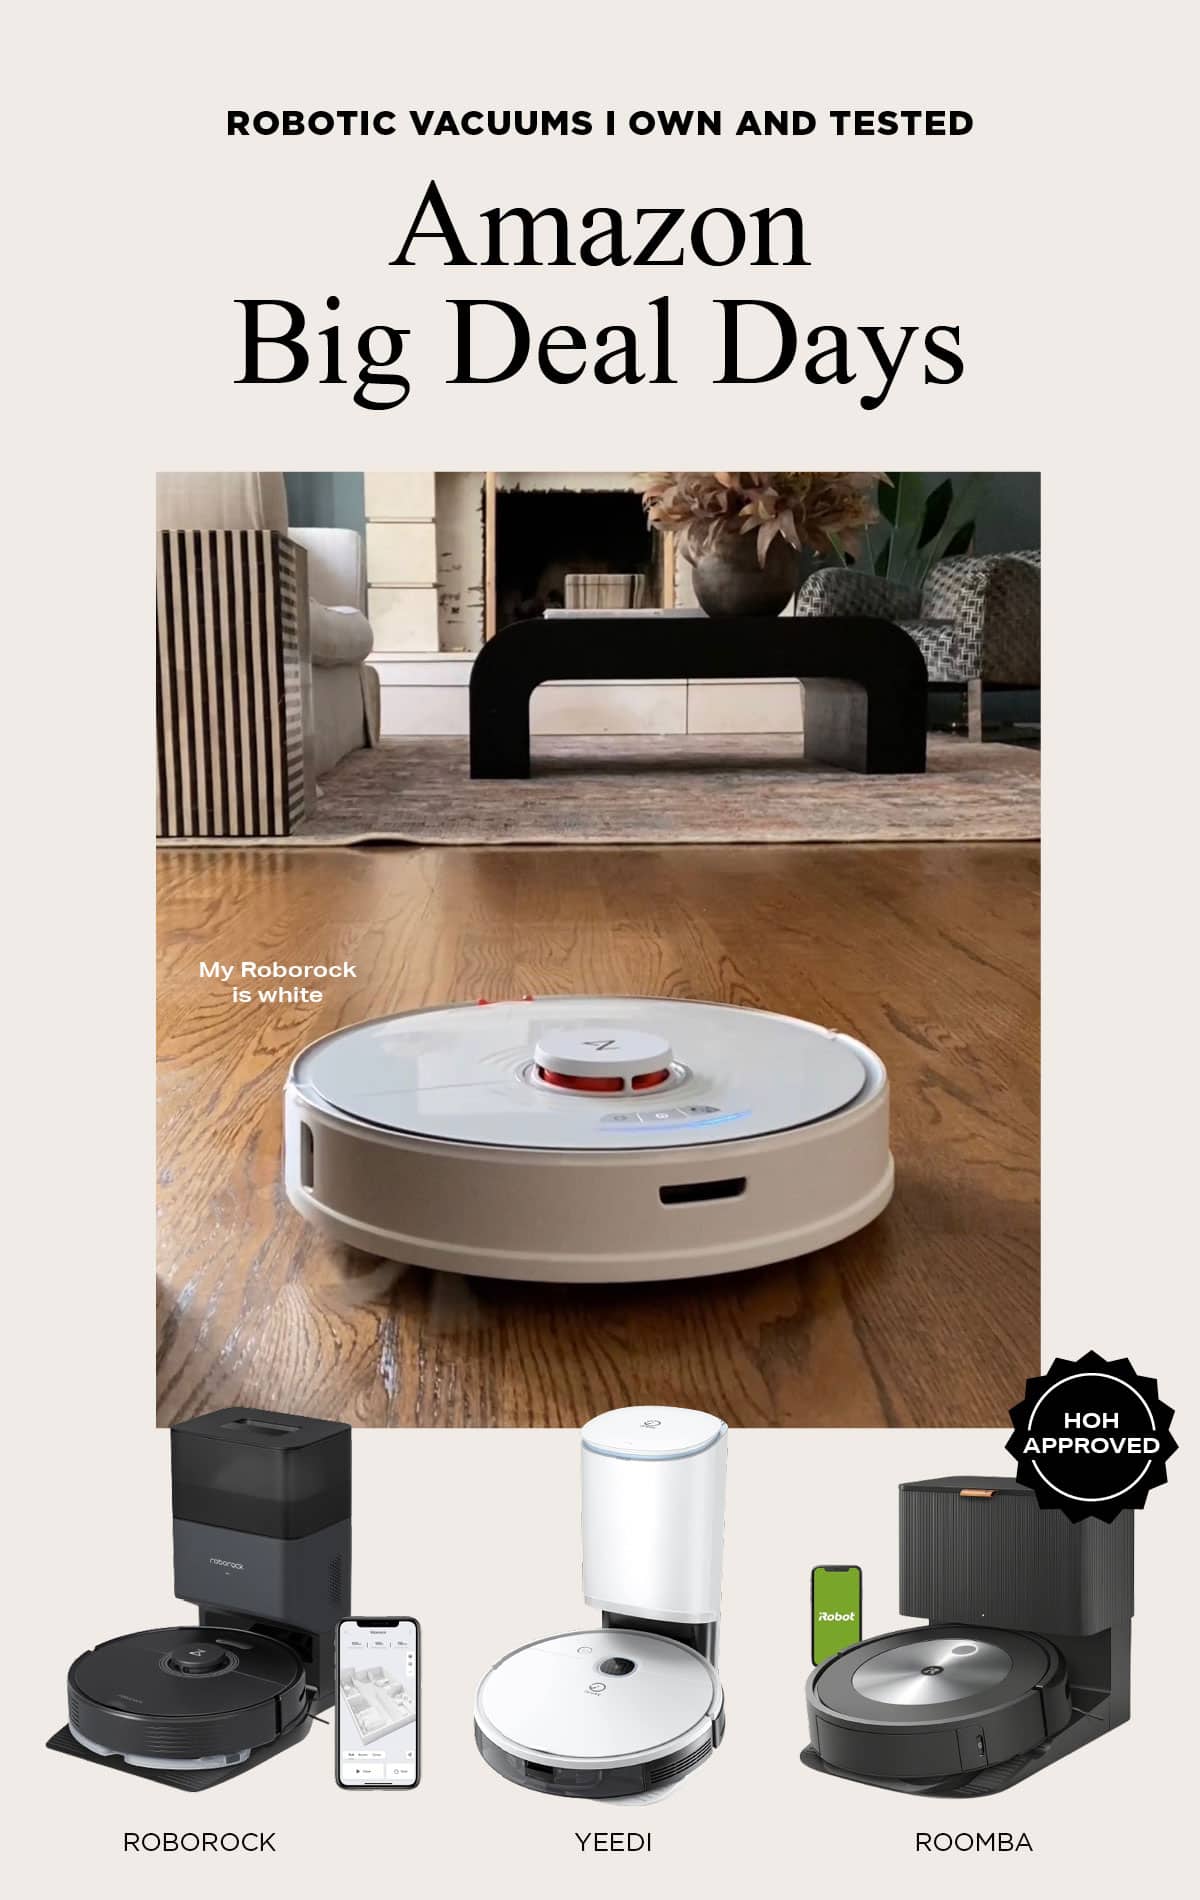 Best of Robot Vacuums On Amazon - I've tested a lot of robot vacuums and these 3 are the best and on sale now during the Amazon Big Deal Days